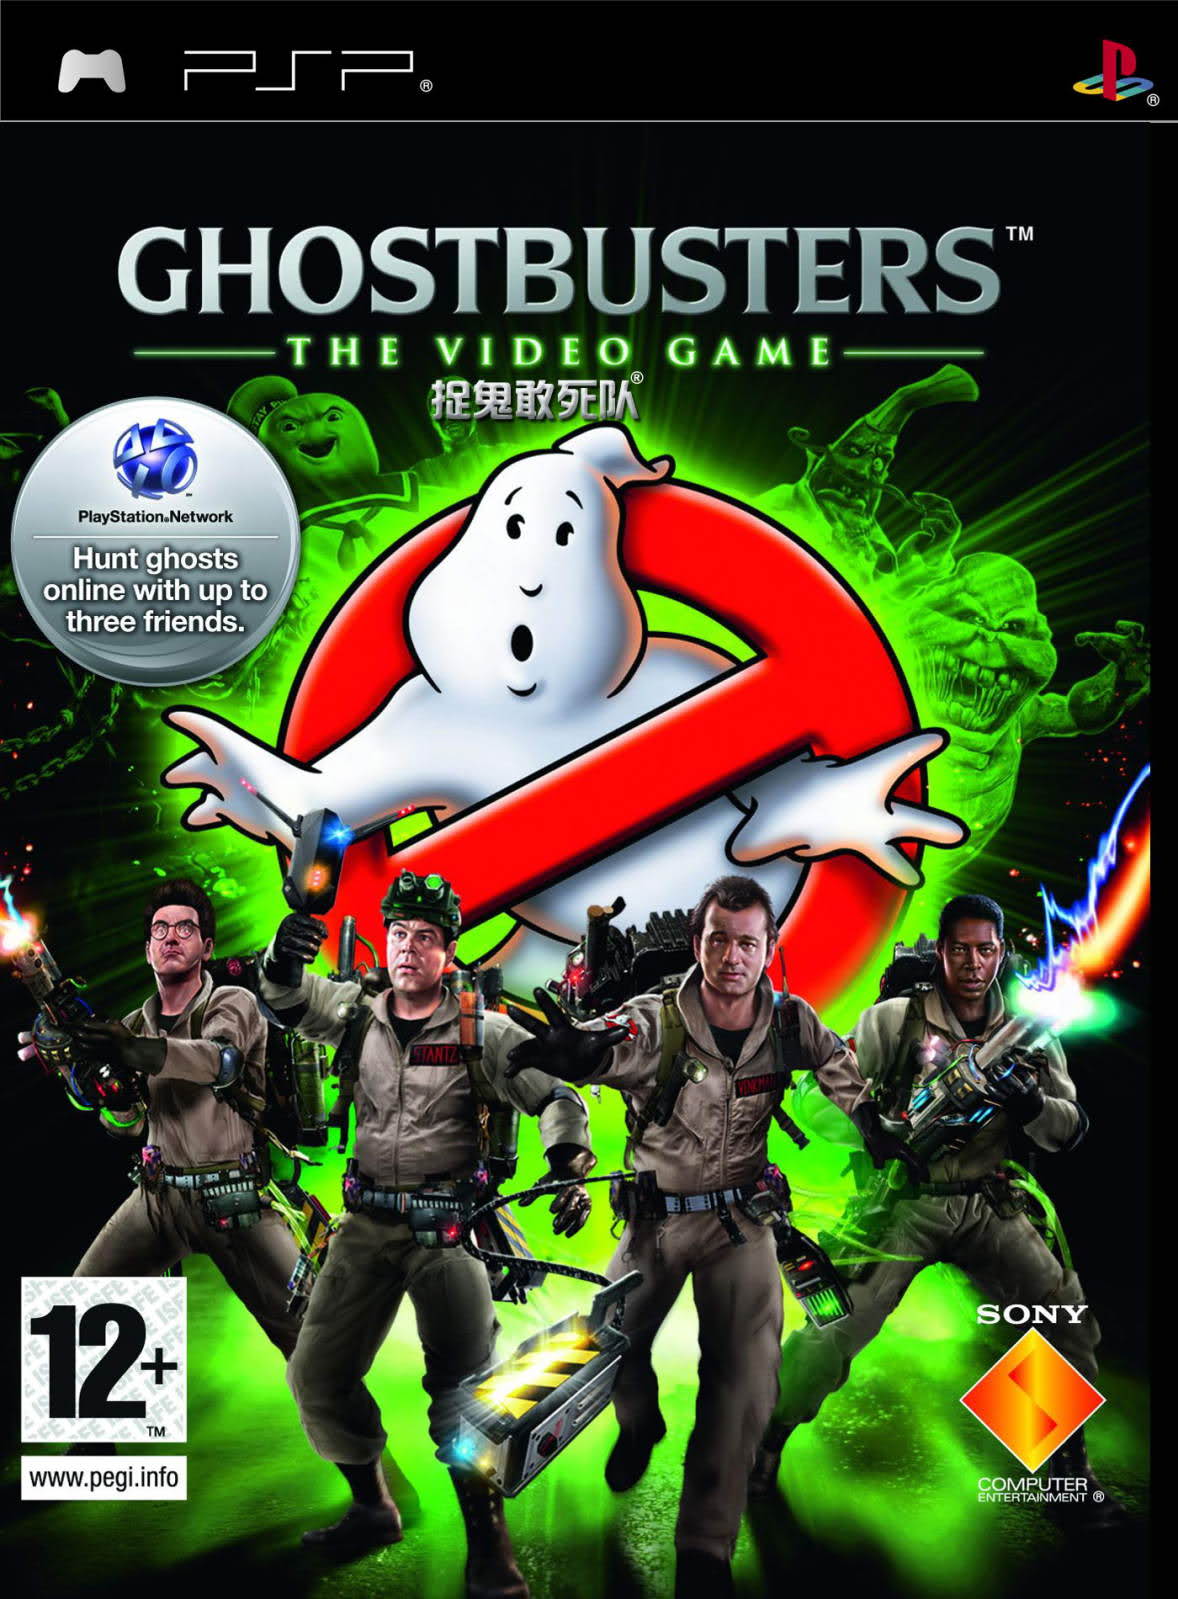 Free Ghostbuster Games